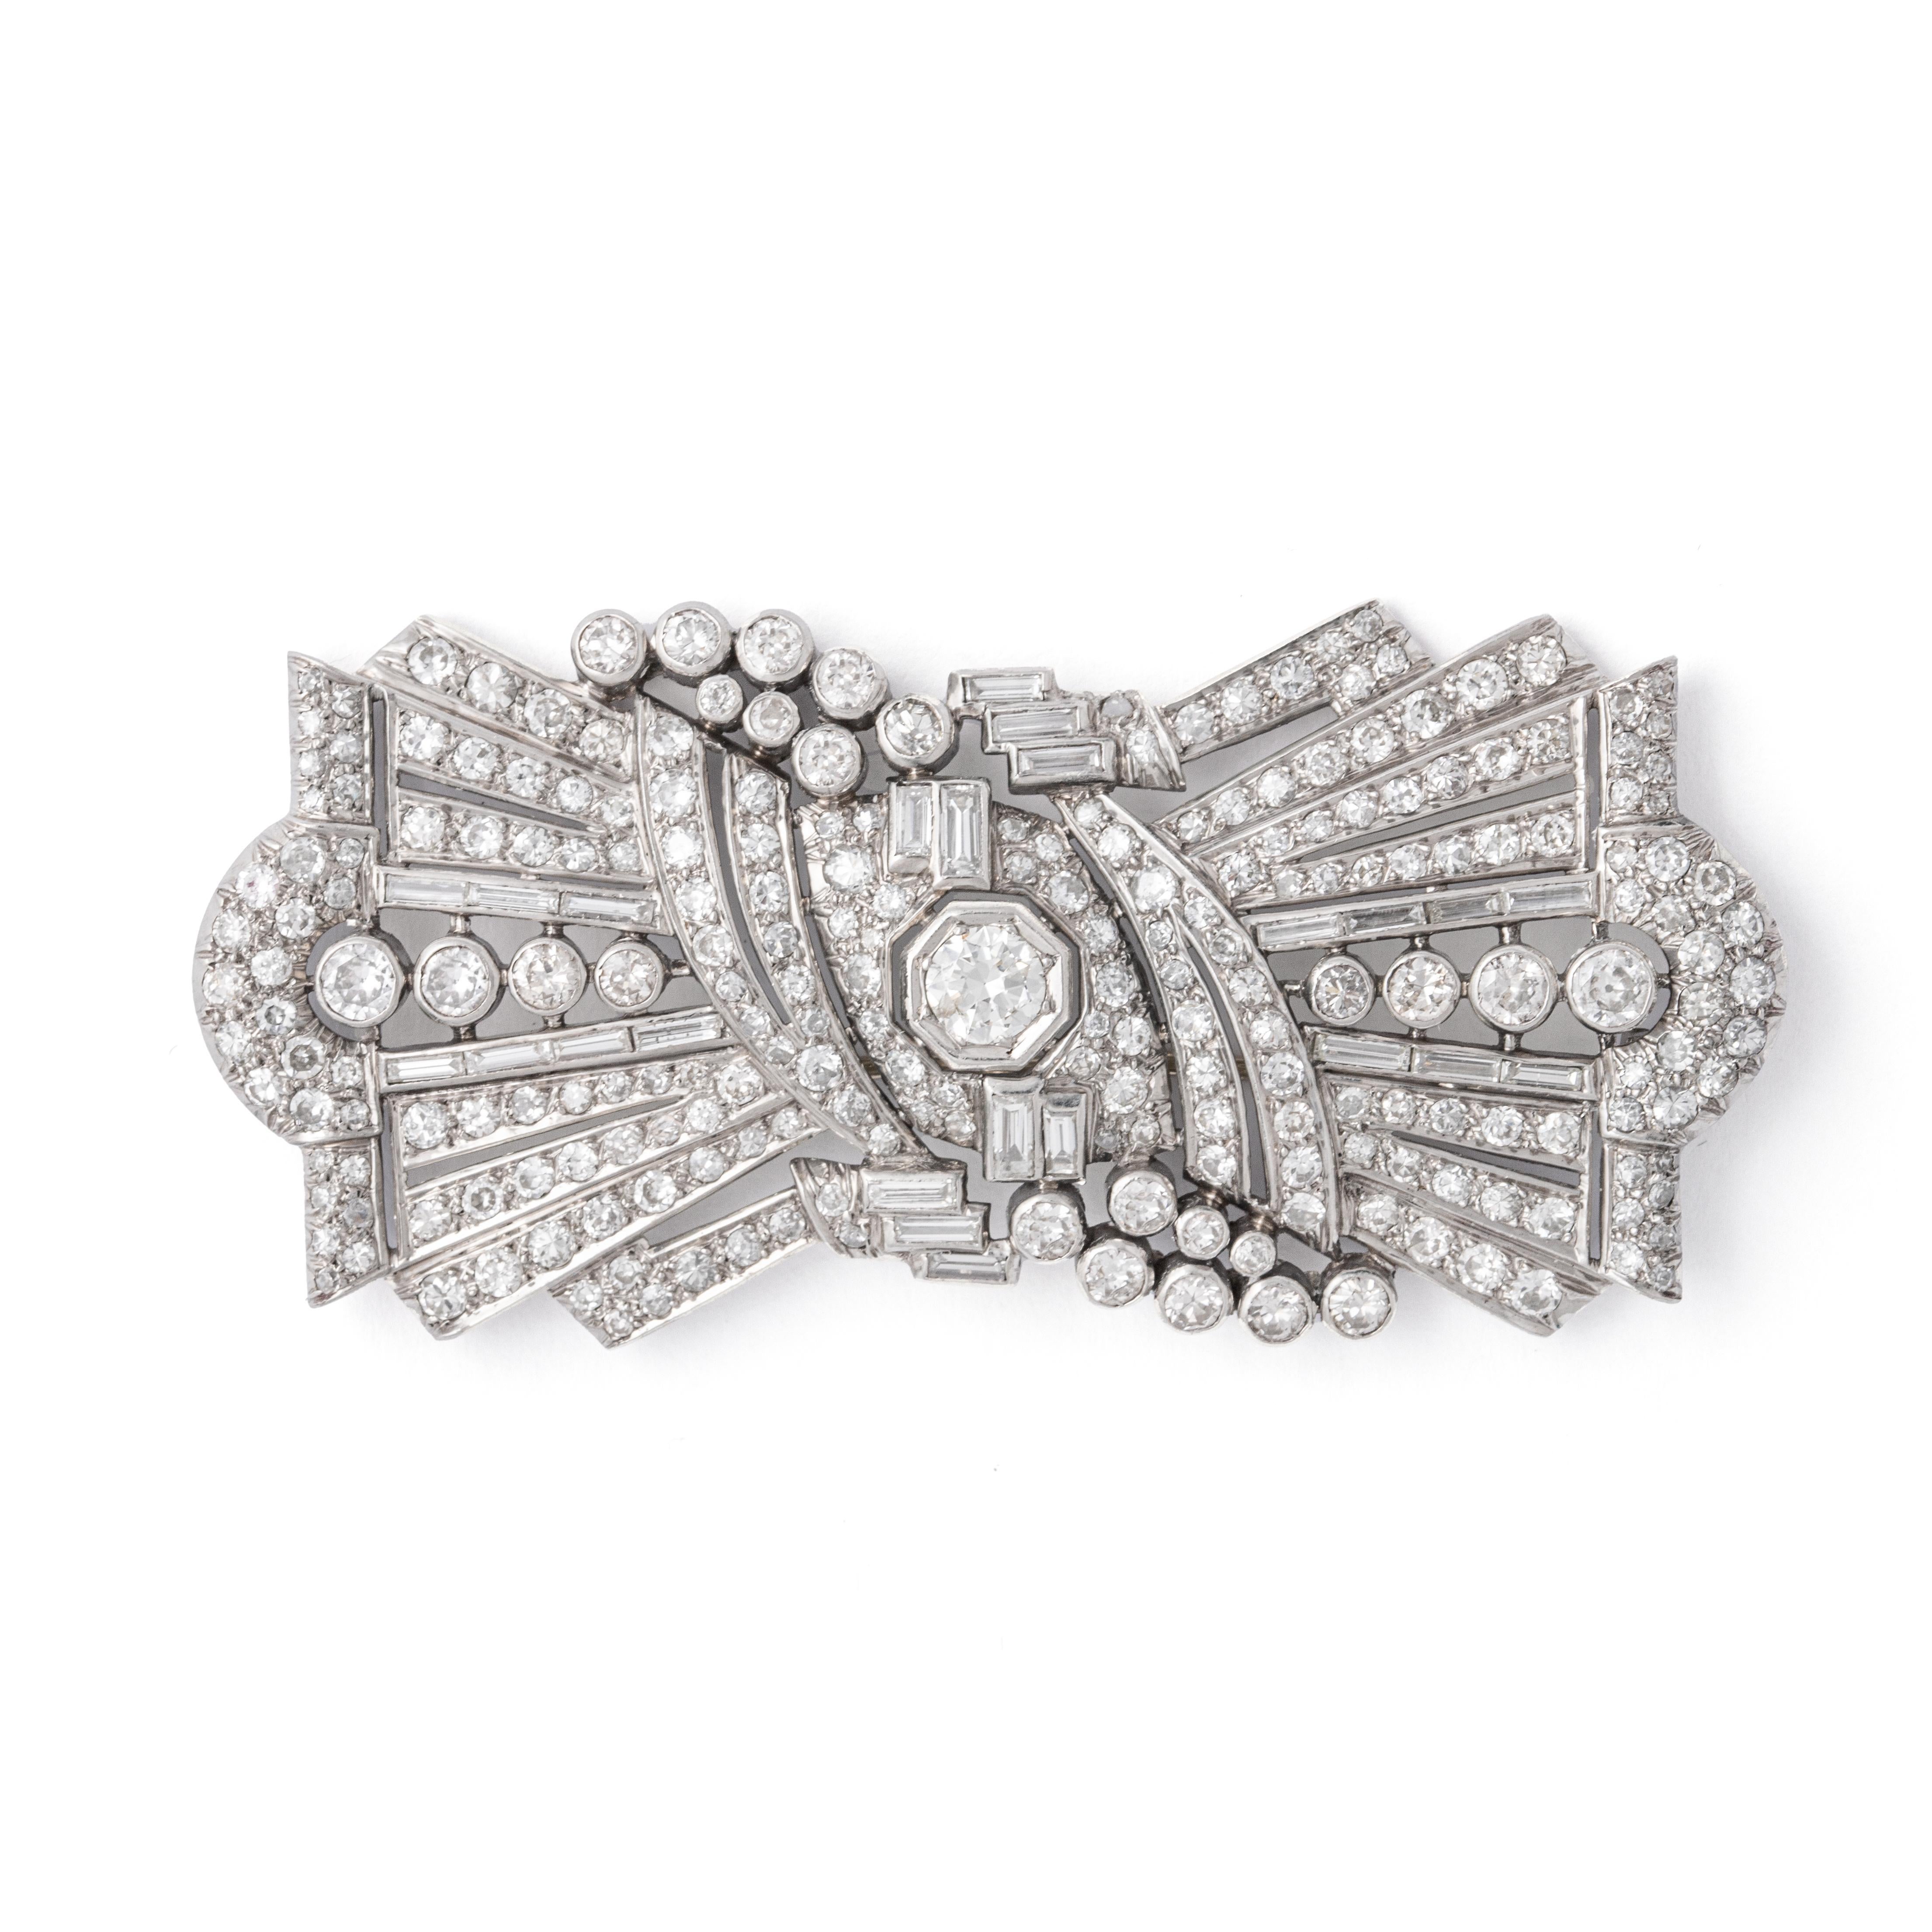 Art Deco Important Diamond Brooch.
Circa 1930.
Length: approx. 7.80 centimeters / 3.07 inches.
Width: approx. 3.70 centimeters / 1.46 inches.
Total weight: 35.16 grams.
